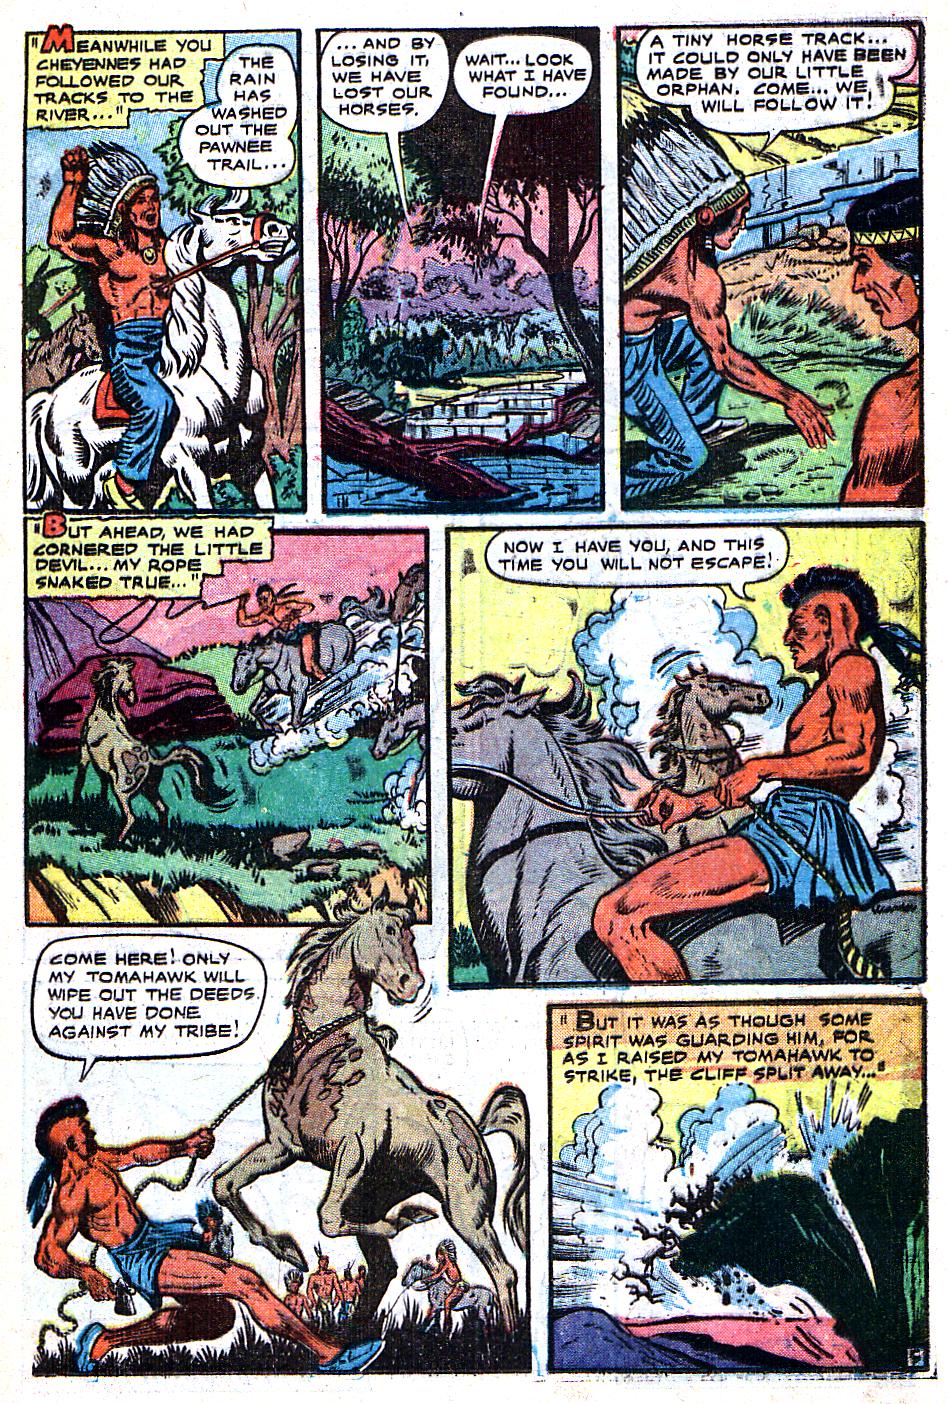 Read online Indians comic -  Issue #8 - 37